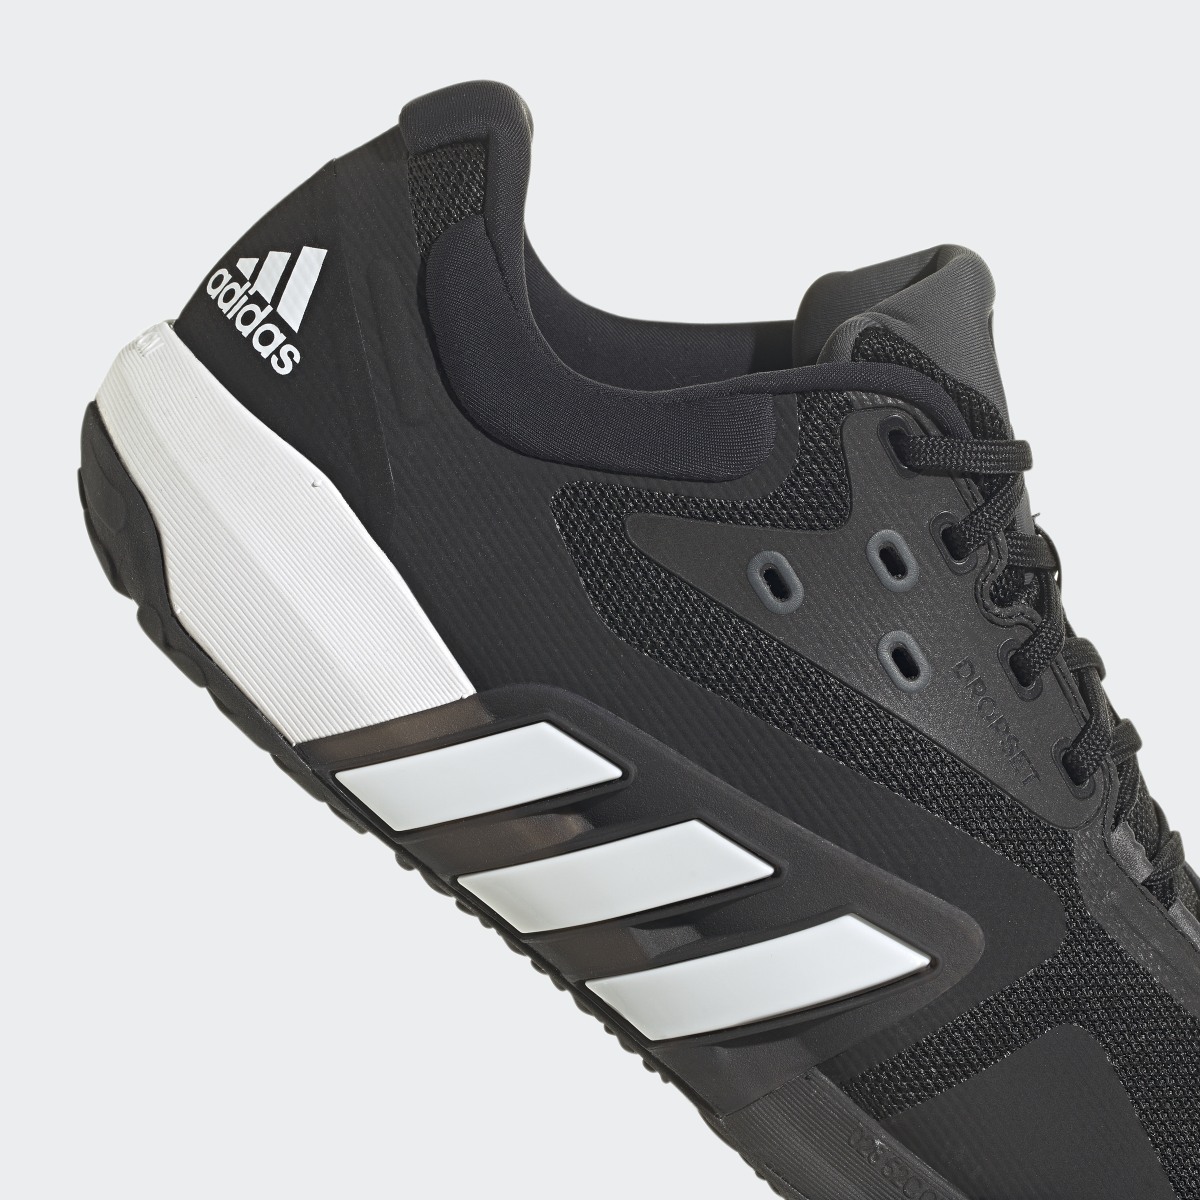 Adidas Dropset Trainer Shoes. 12